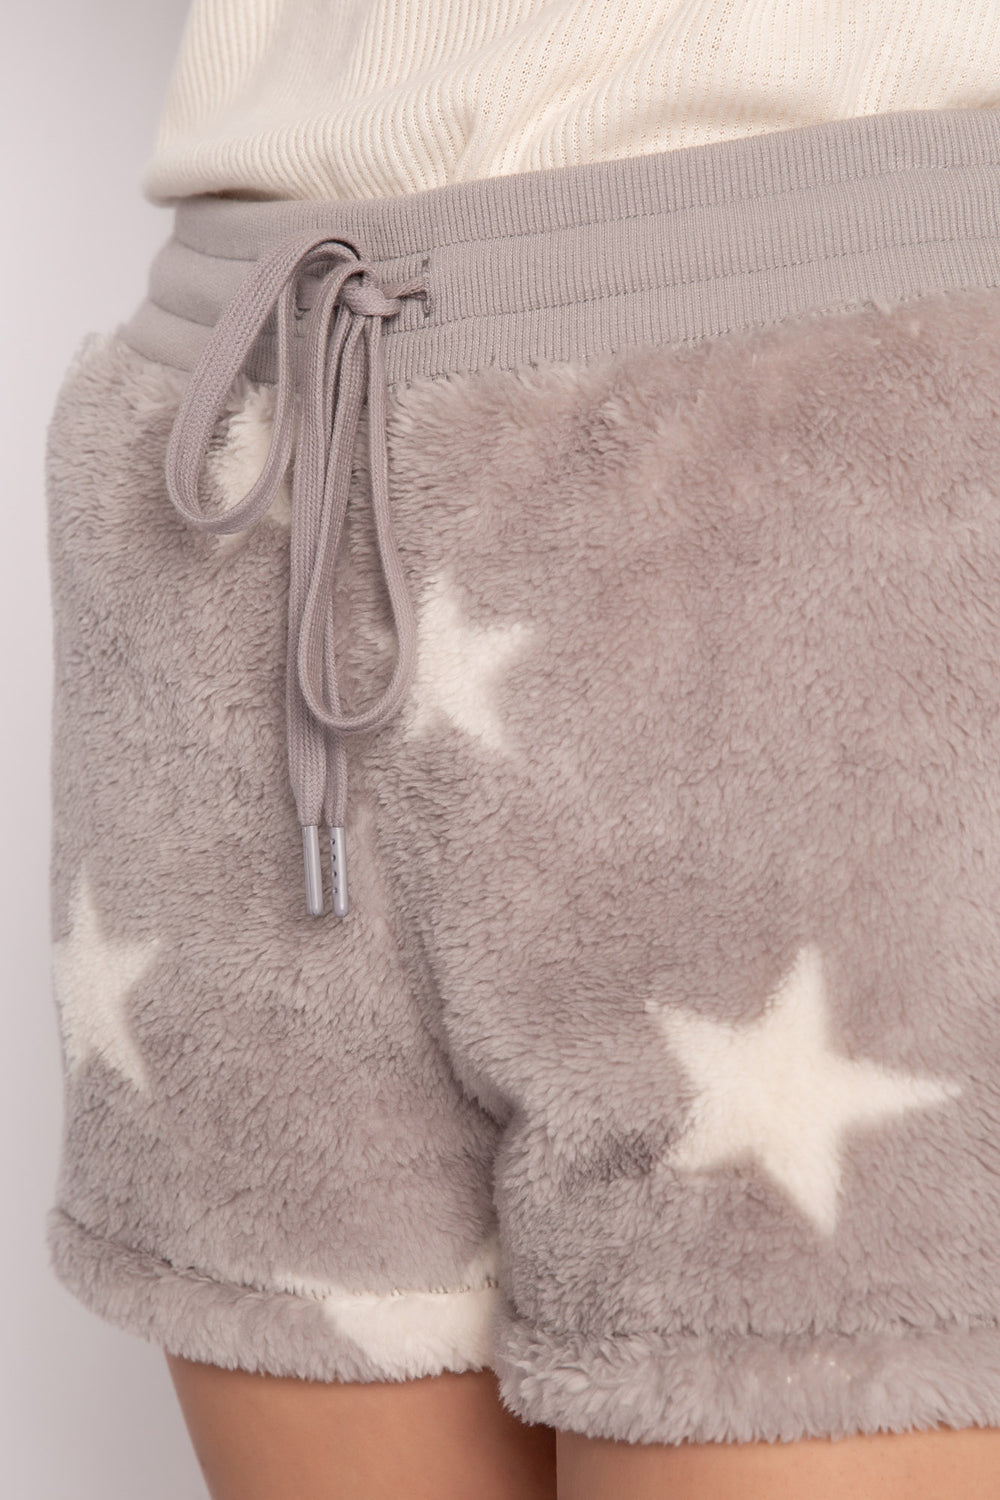 Printed cozy plush cozy short in grey-white star print. Ribbed waistband with tie. (7231872630884)